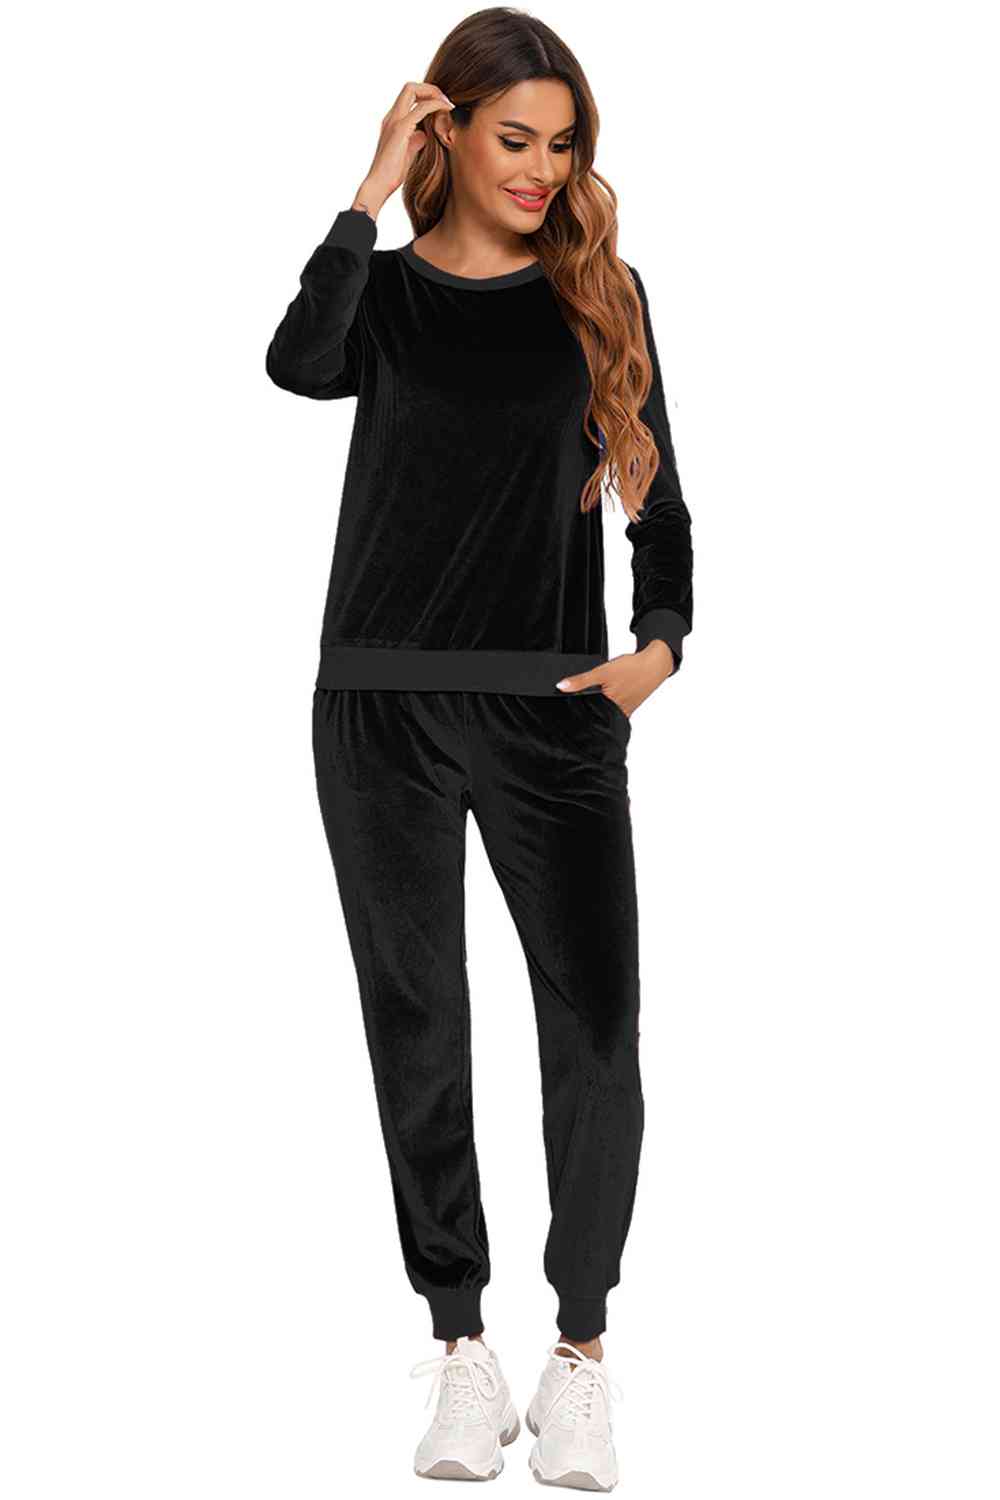 Round Neck Long Sleeve Loungewear Set with Pockets (3 Colors) Loungewear Krazy Heart Designs Boutique   